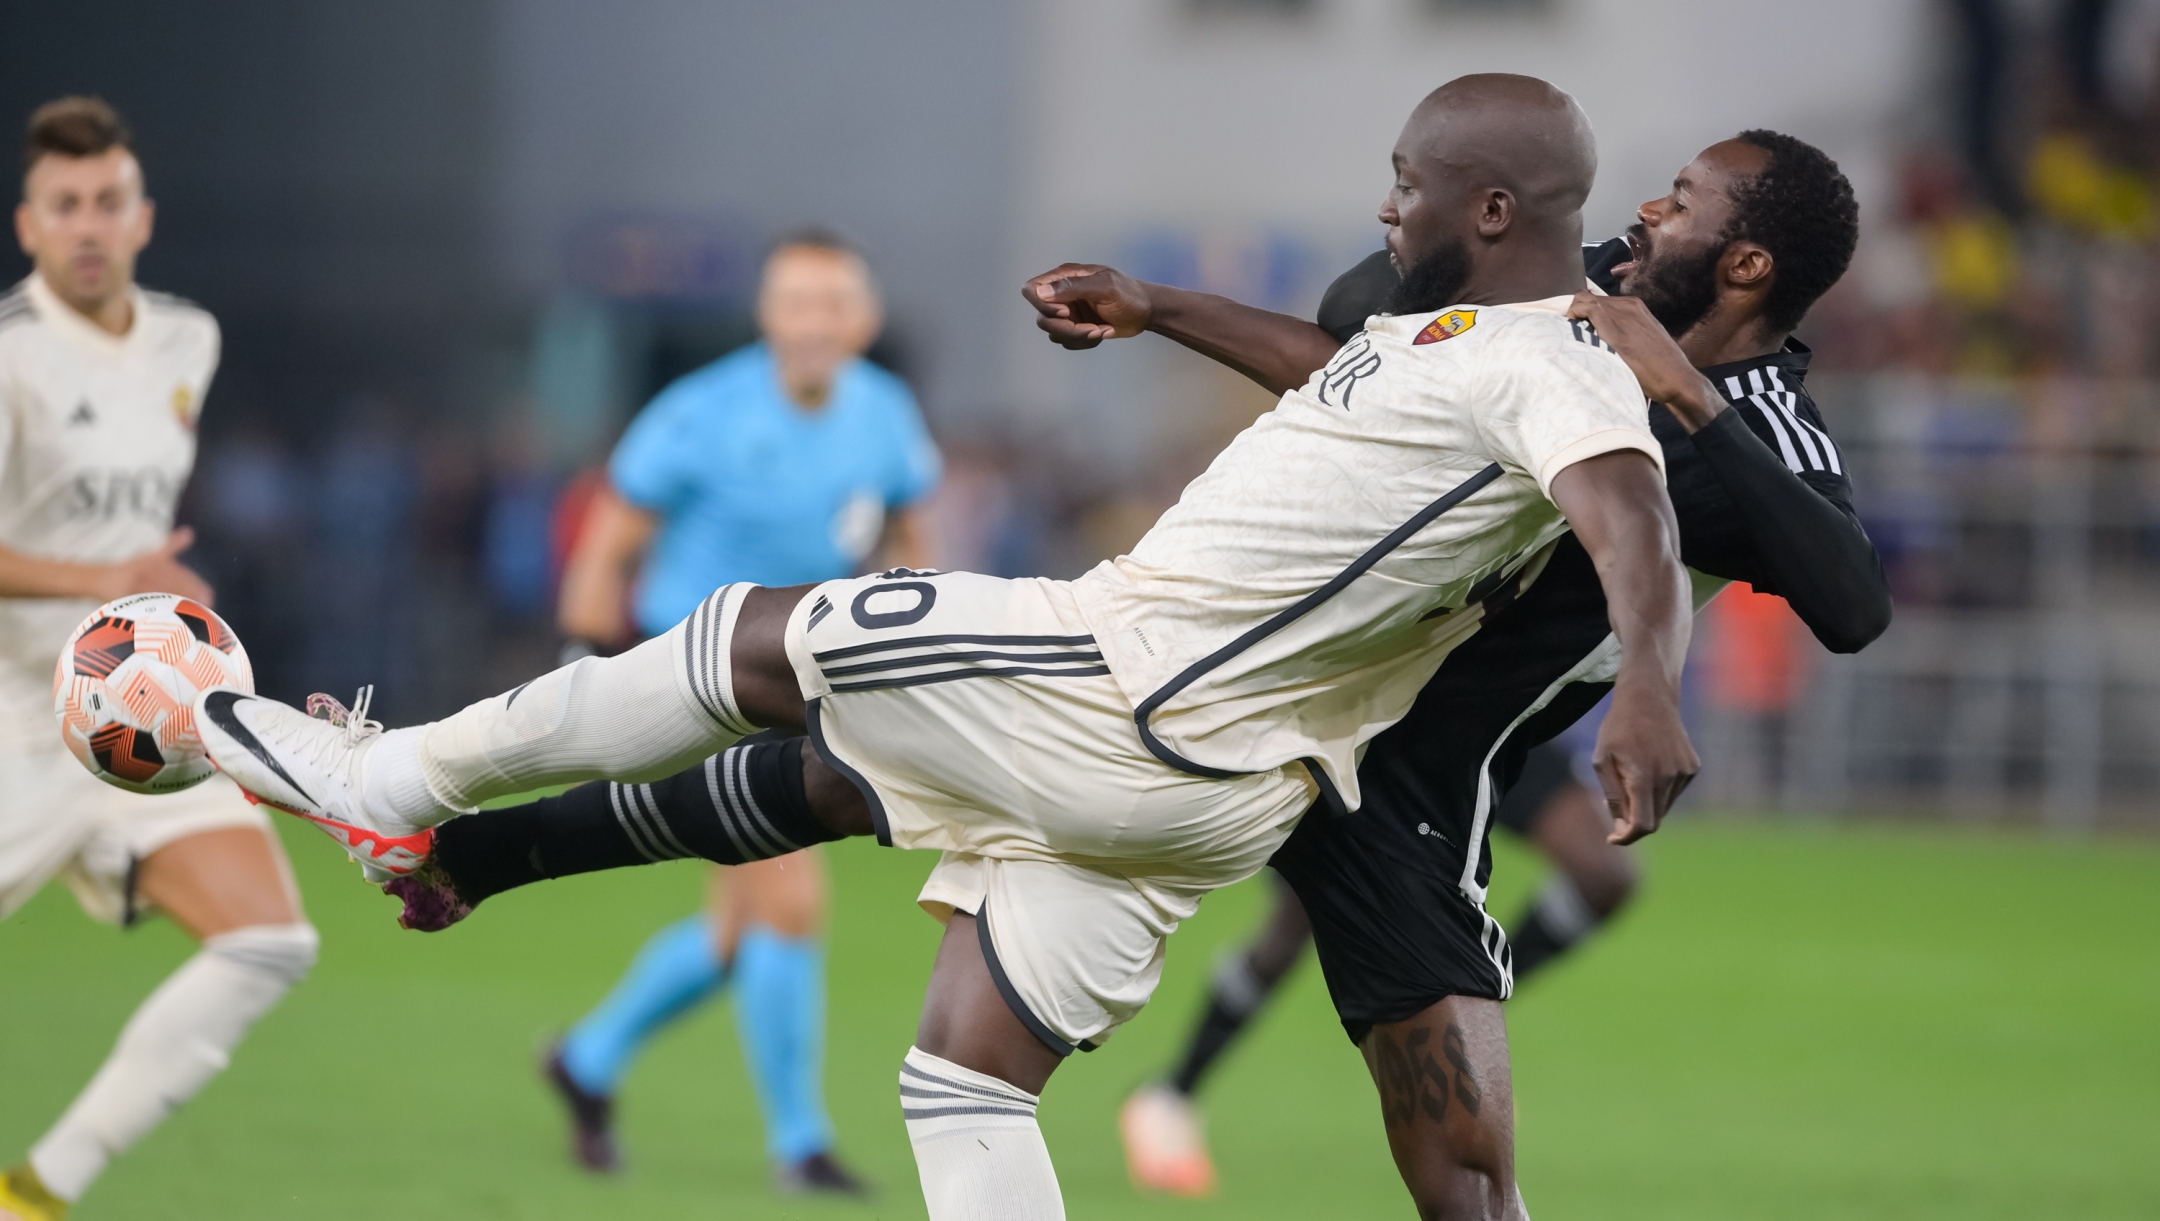 TIRASPOL, MOLDOVA - SEPTEMBER 21: Romelu Lukaku of AS Roma competes for the ball during the UEFA Europa League 2023/24 match between FC Sheriff Tiraspol at Arena Sheriff on September 21, 2023 in Tiraspol, Moldova. (Photo by Fabio Rossi/AS Roma via Getty Images)